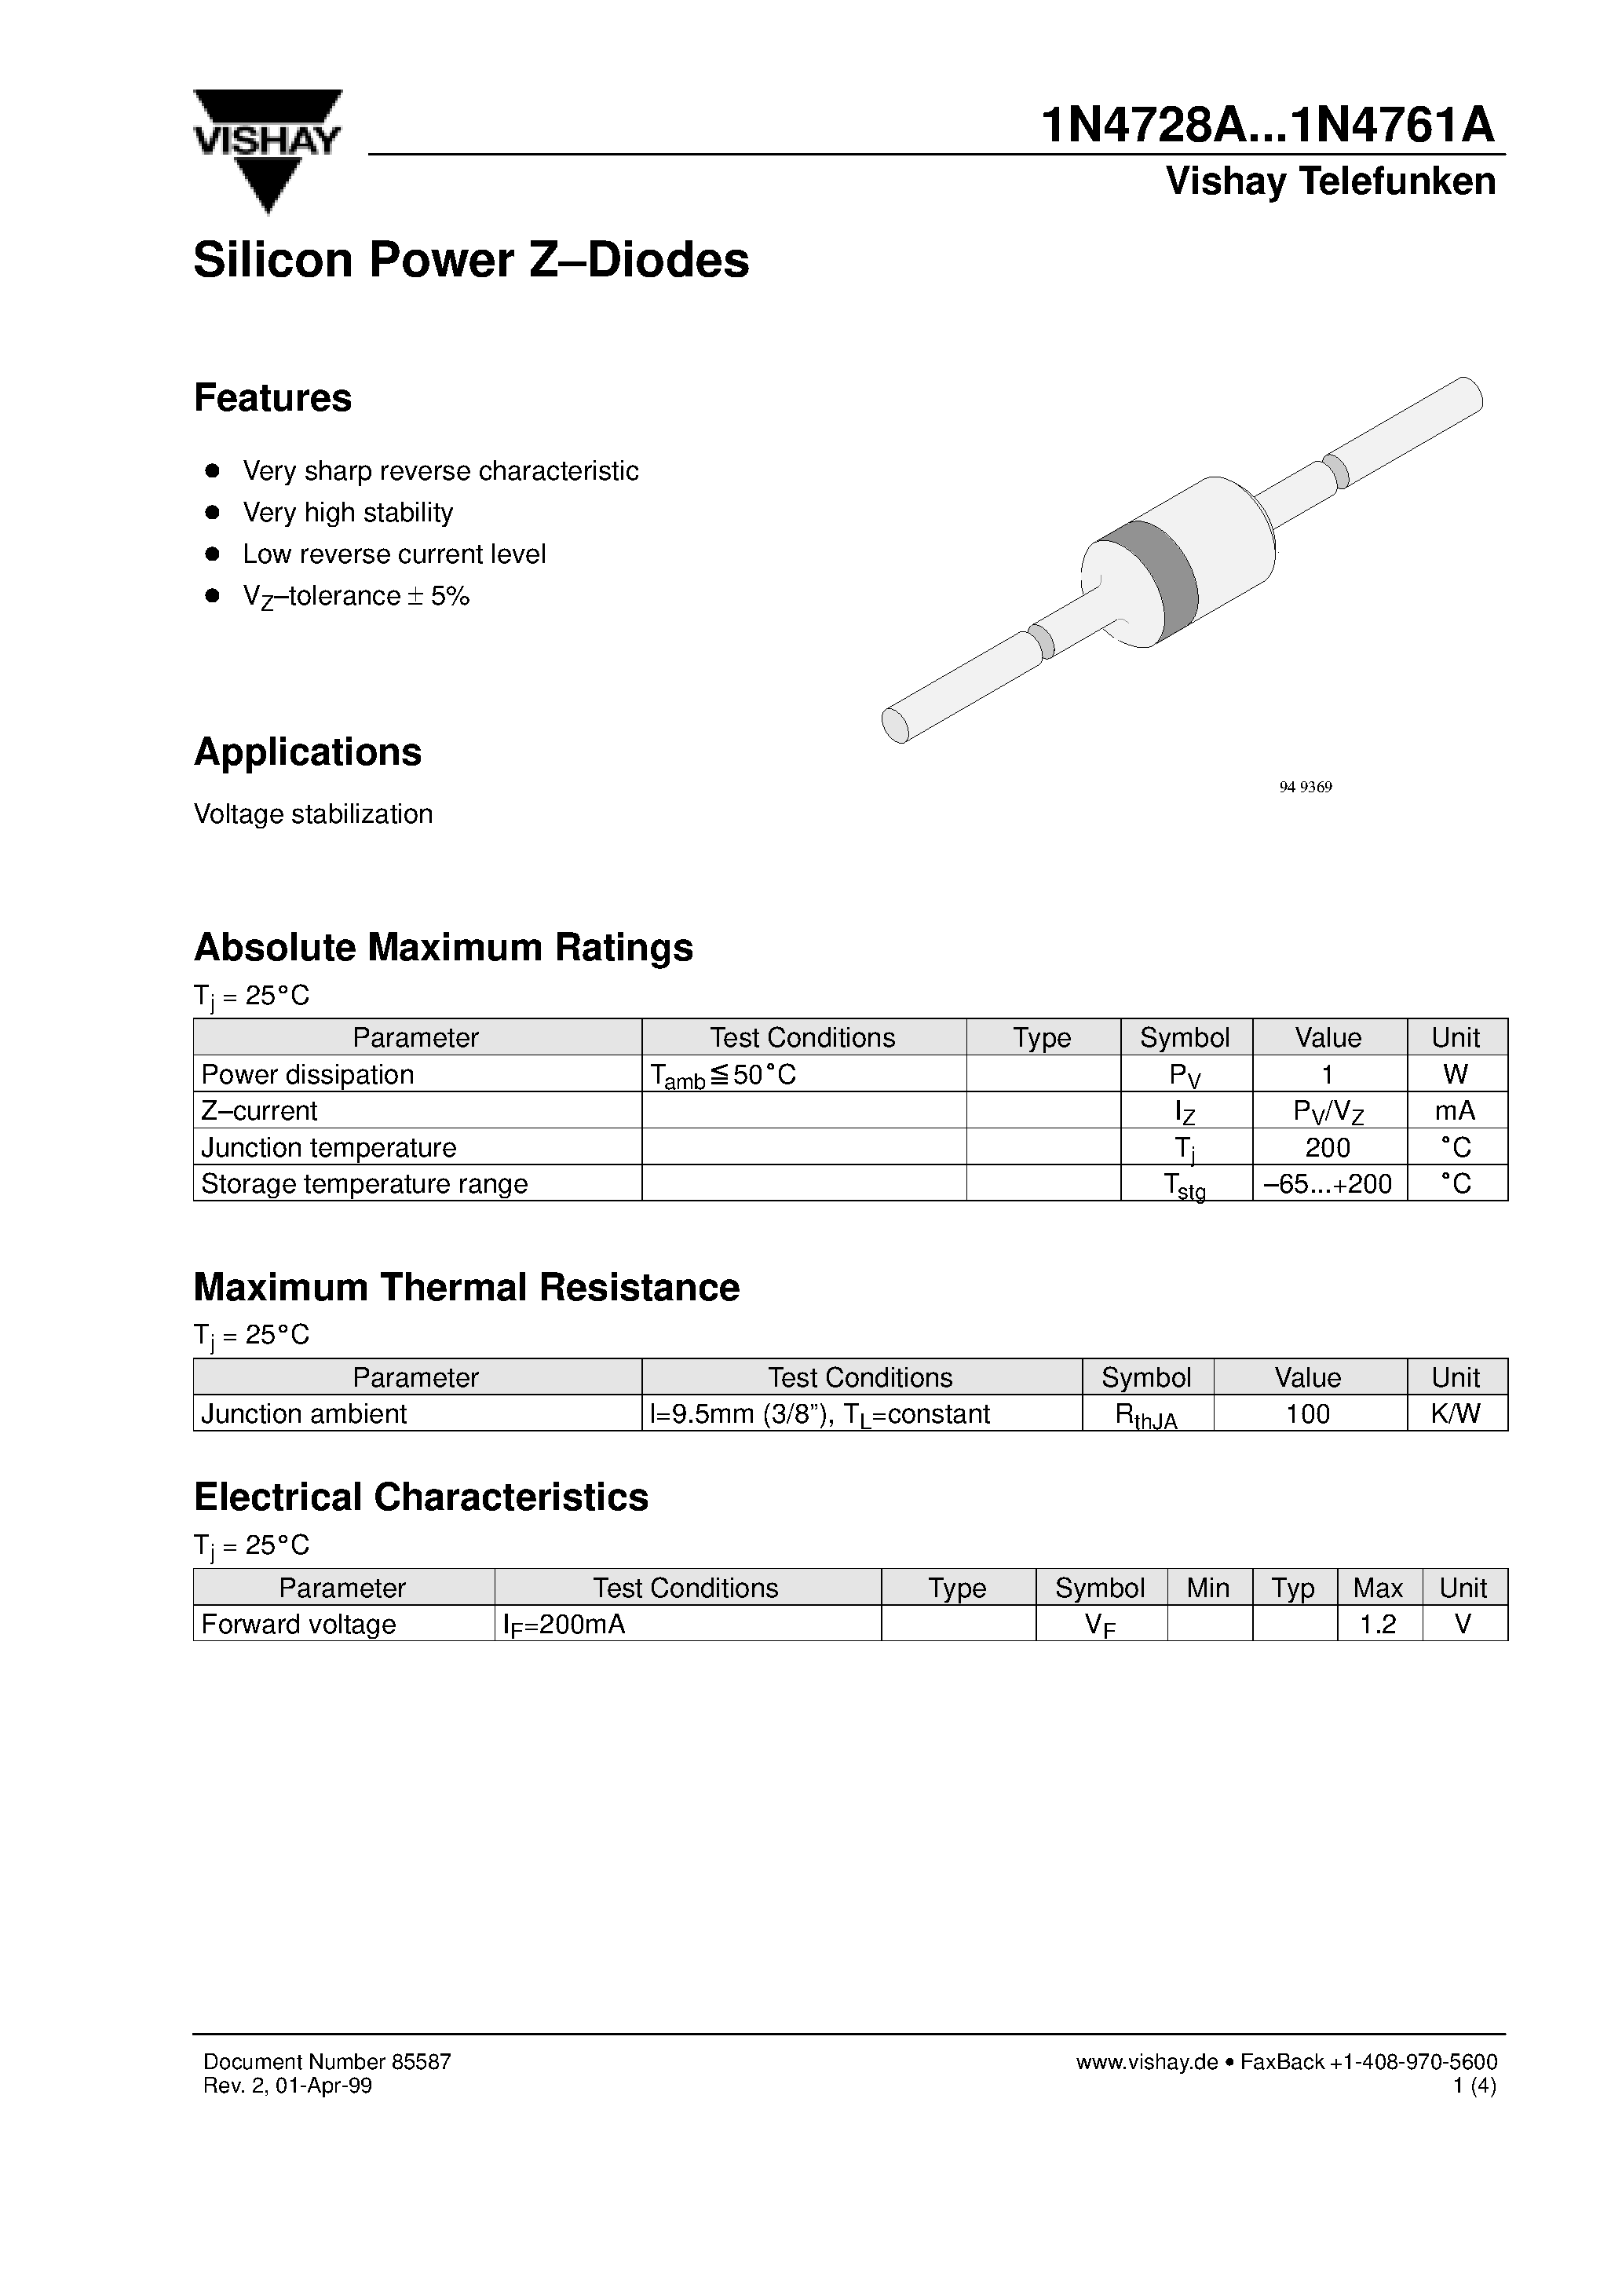 Datasheet 1N4755A - Silicon Power Z-Diodes page 1